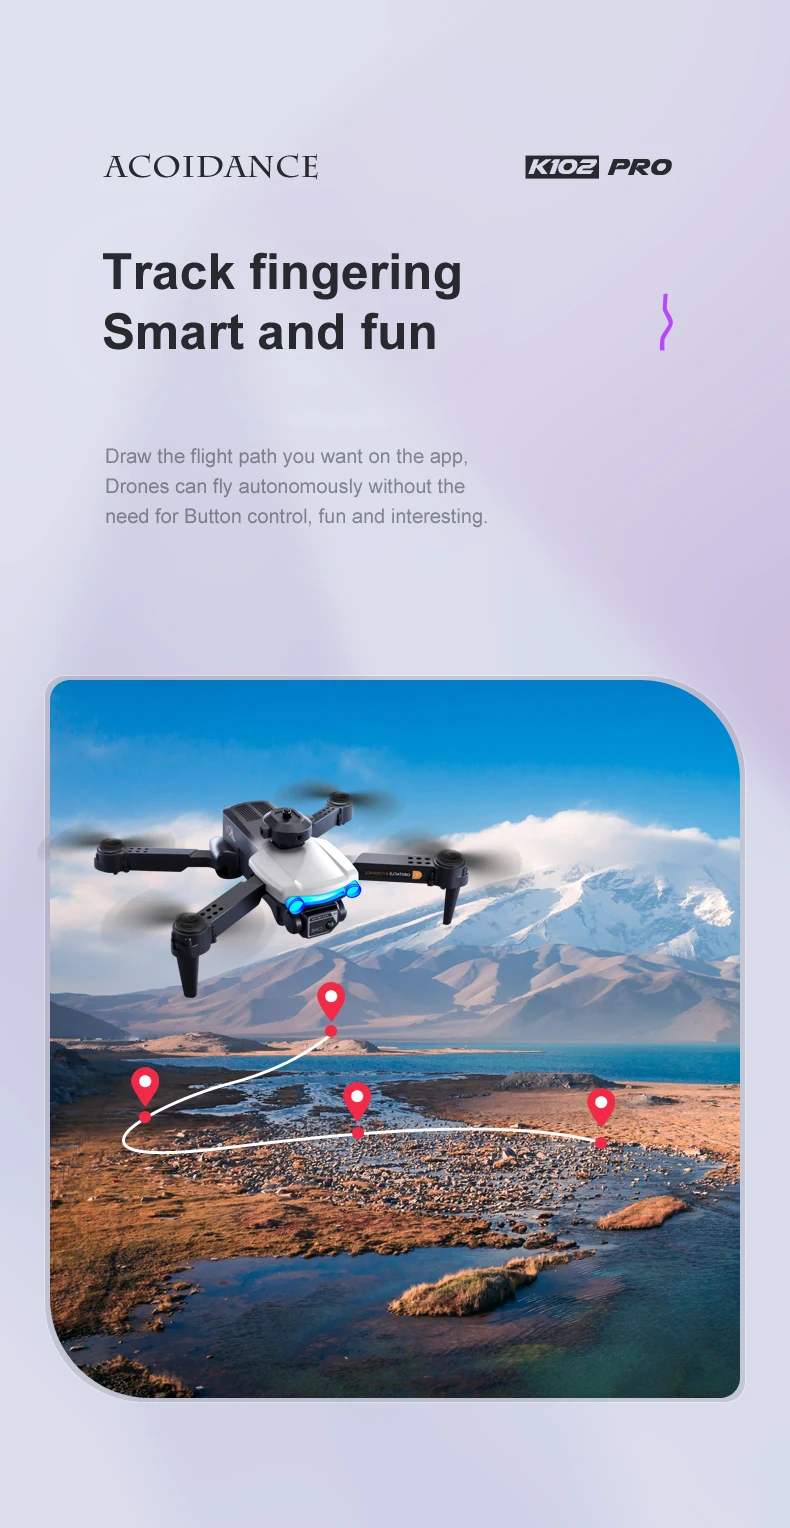 K102 Pro Drone, drones can fly autonomously without the need for button control .